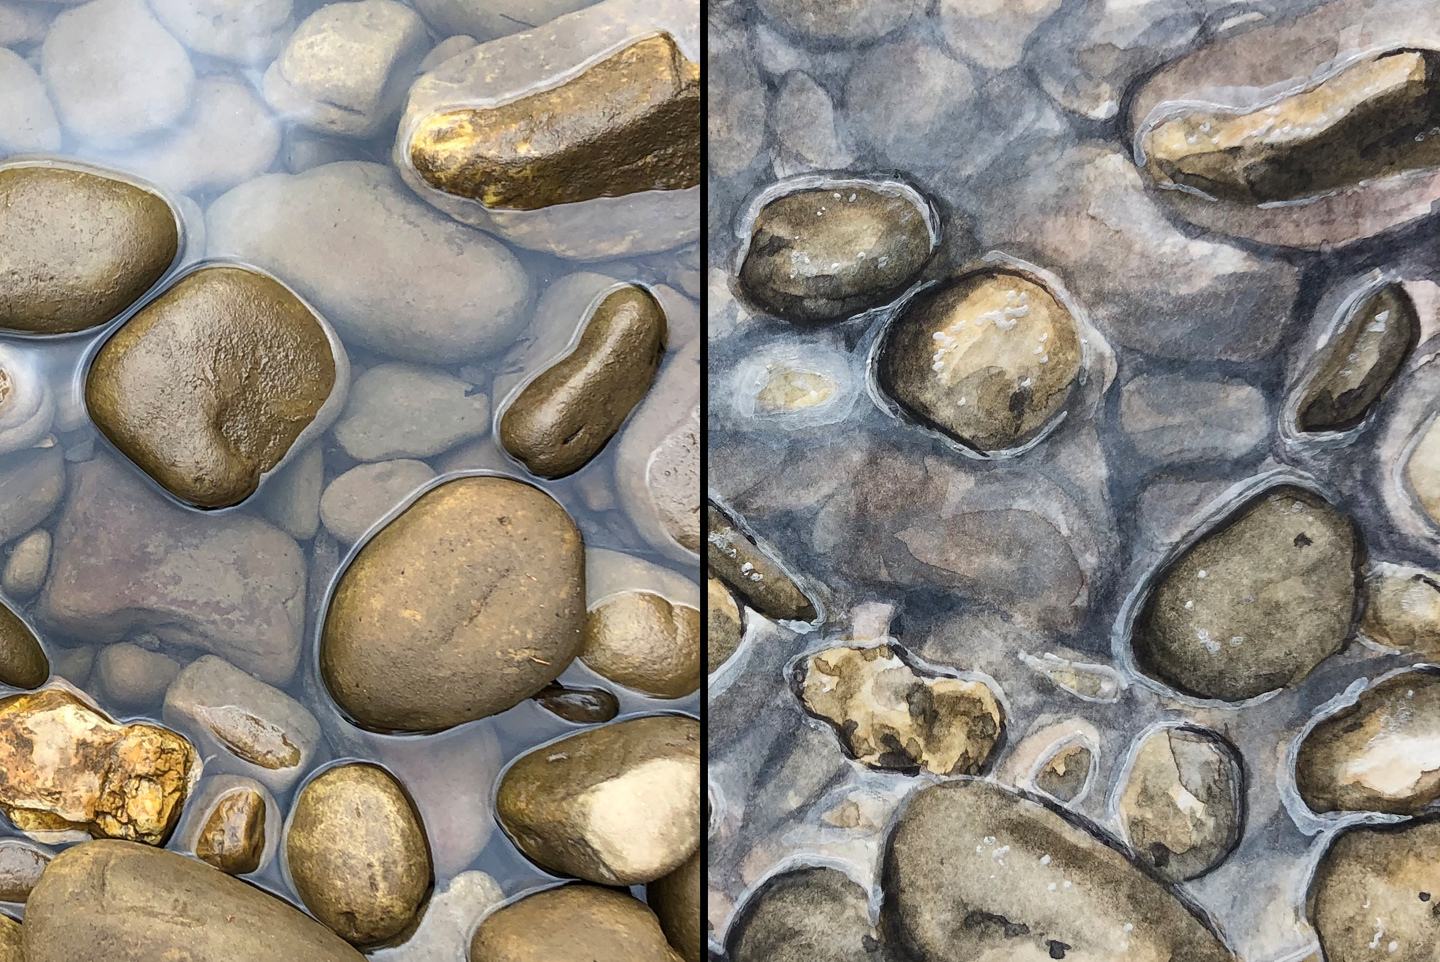 Two images of smooth rocks under water